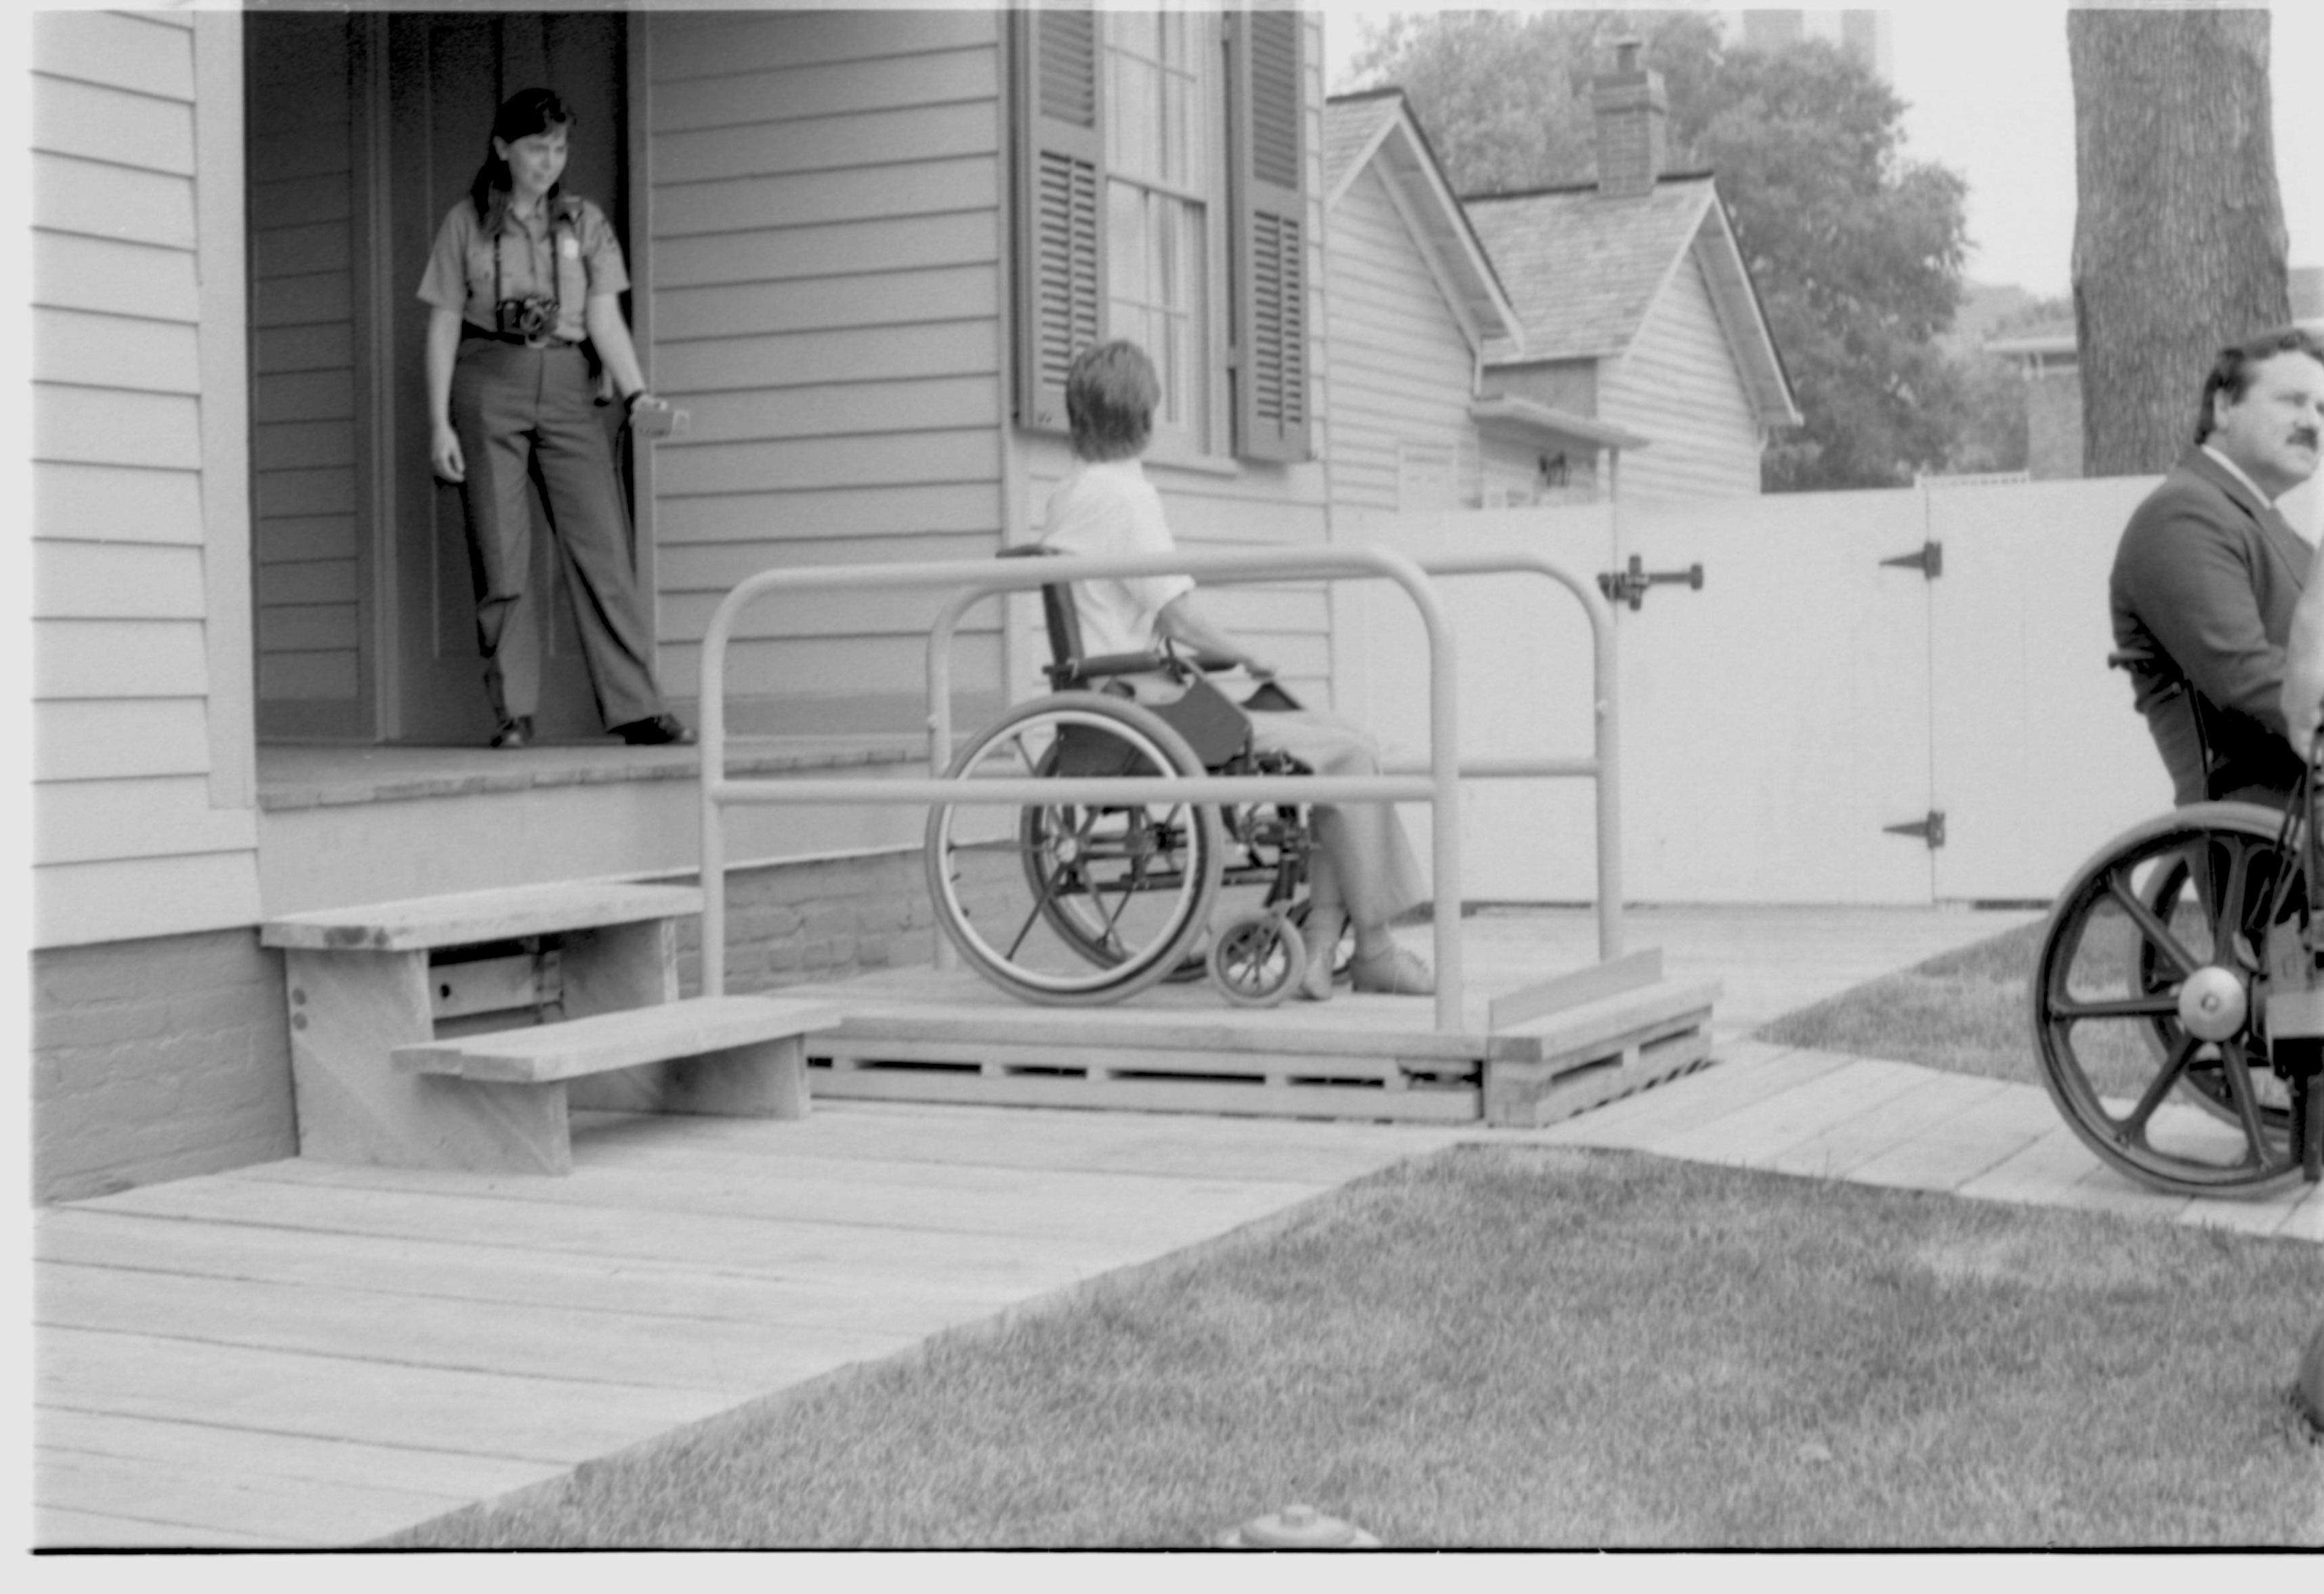 Lincoln Home wheelchair lift patially retracted. One man in wheelchair on lift, with one other man in wheelchair to right of picture. Staff member on back porch using lift controls. Corneau house in background. Photographer facing north west.